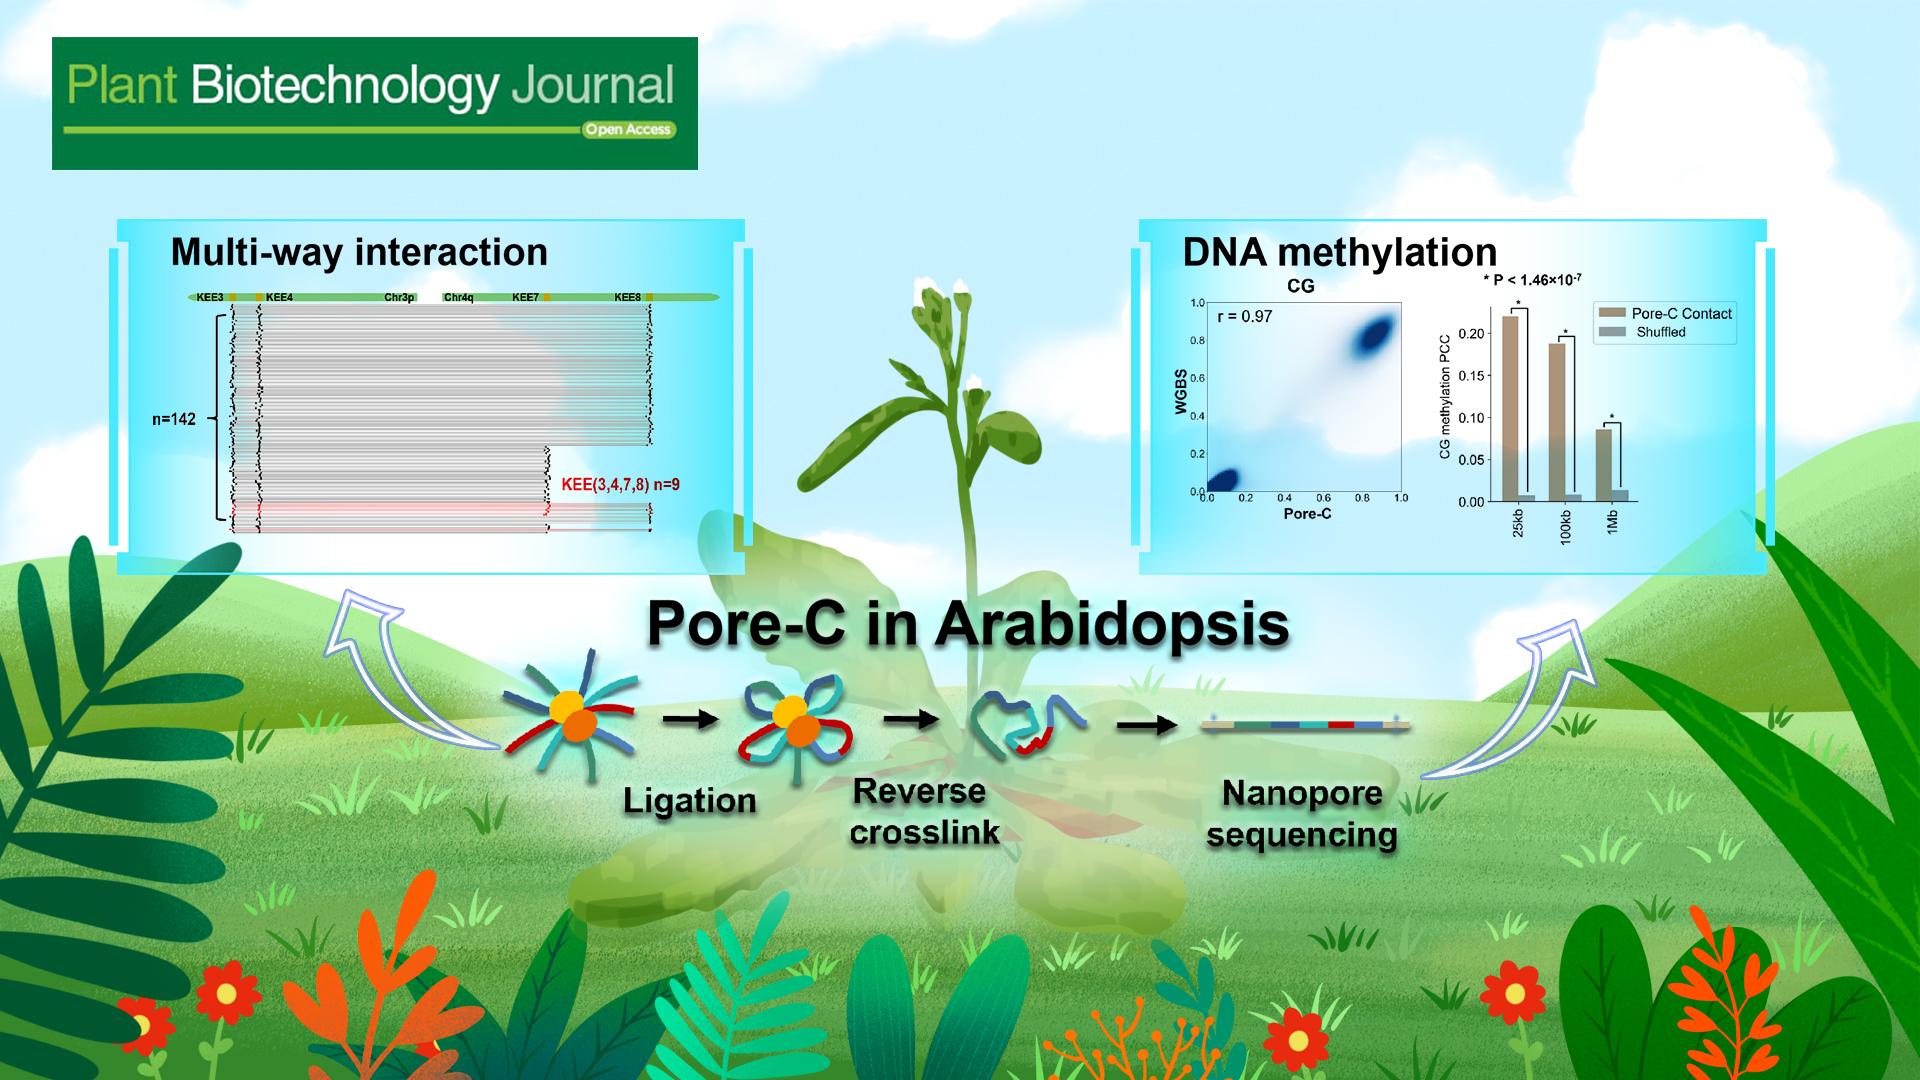 Researchers reveal multi-way interactions and associated DNA methylation modifications in Arabidopsis using Pore-C technology